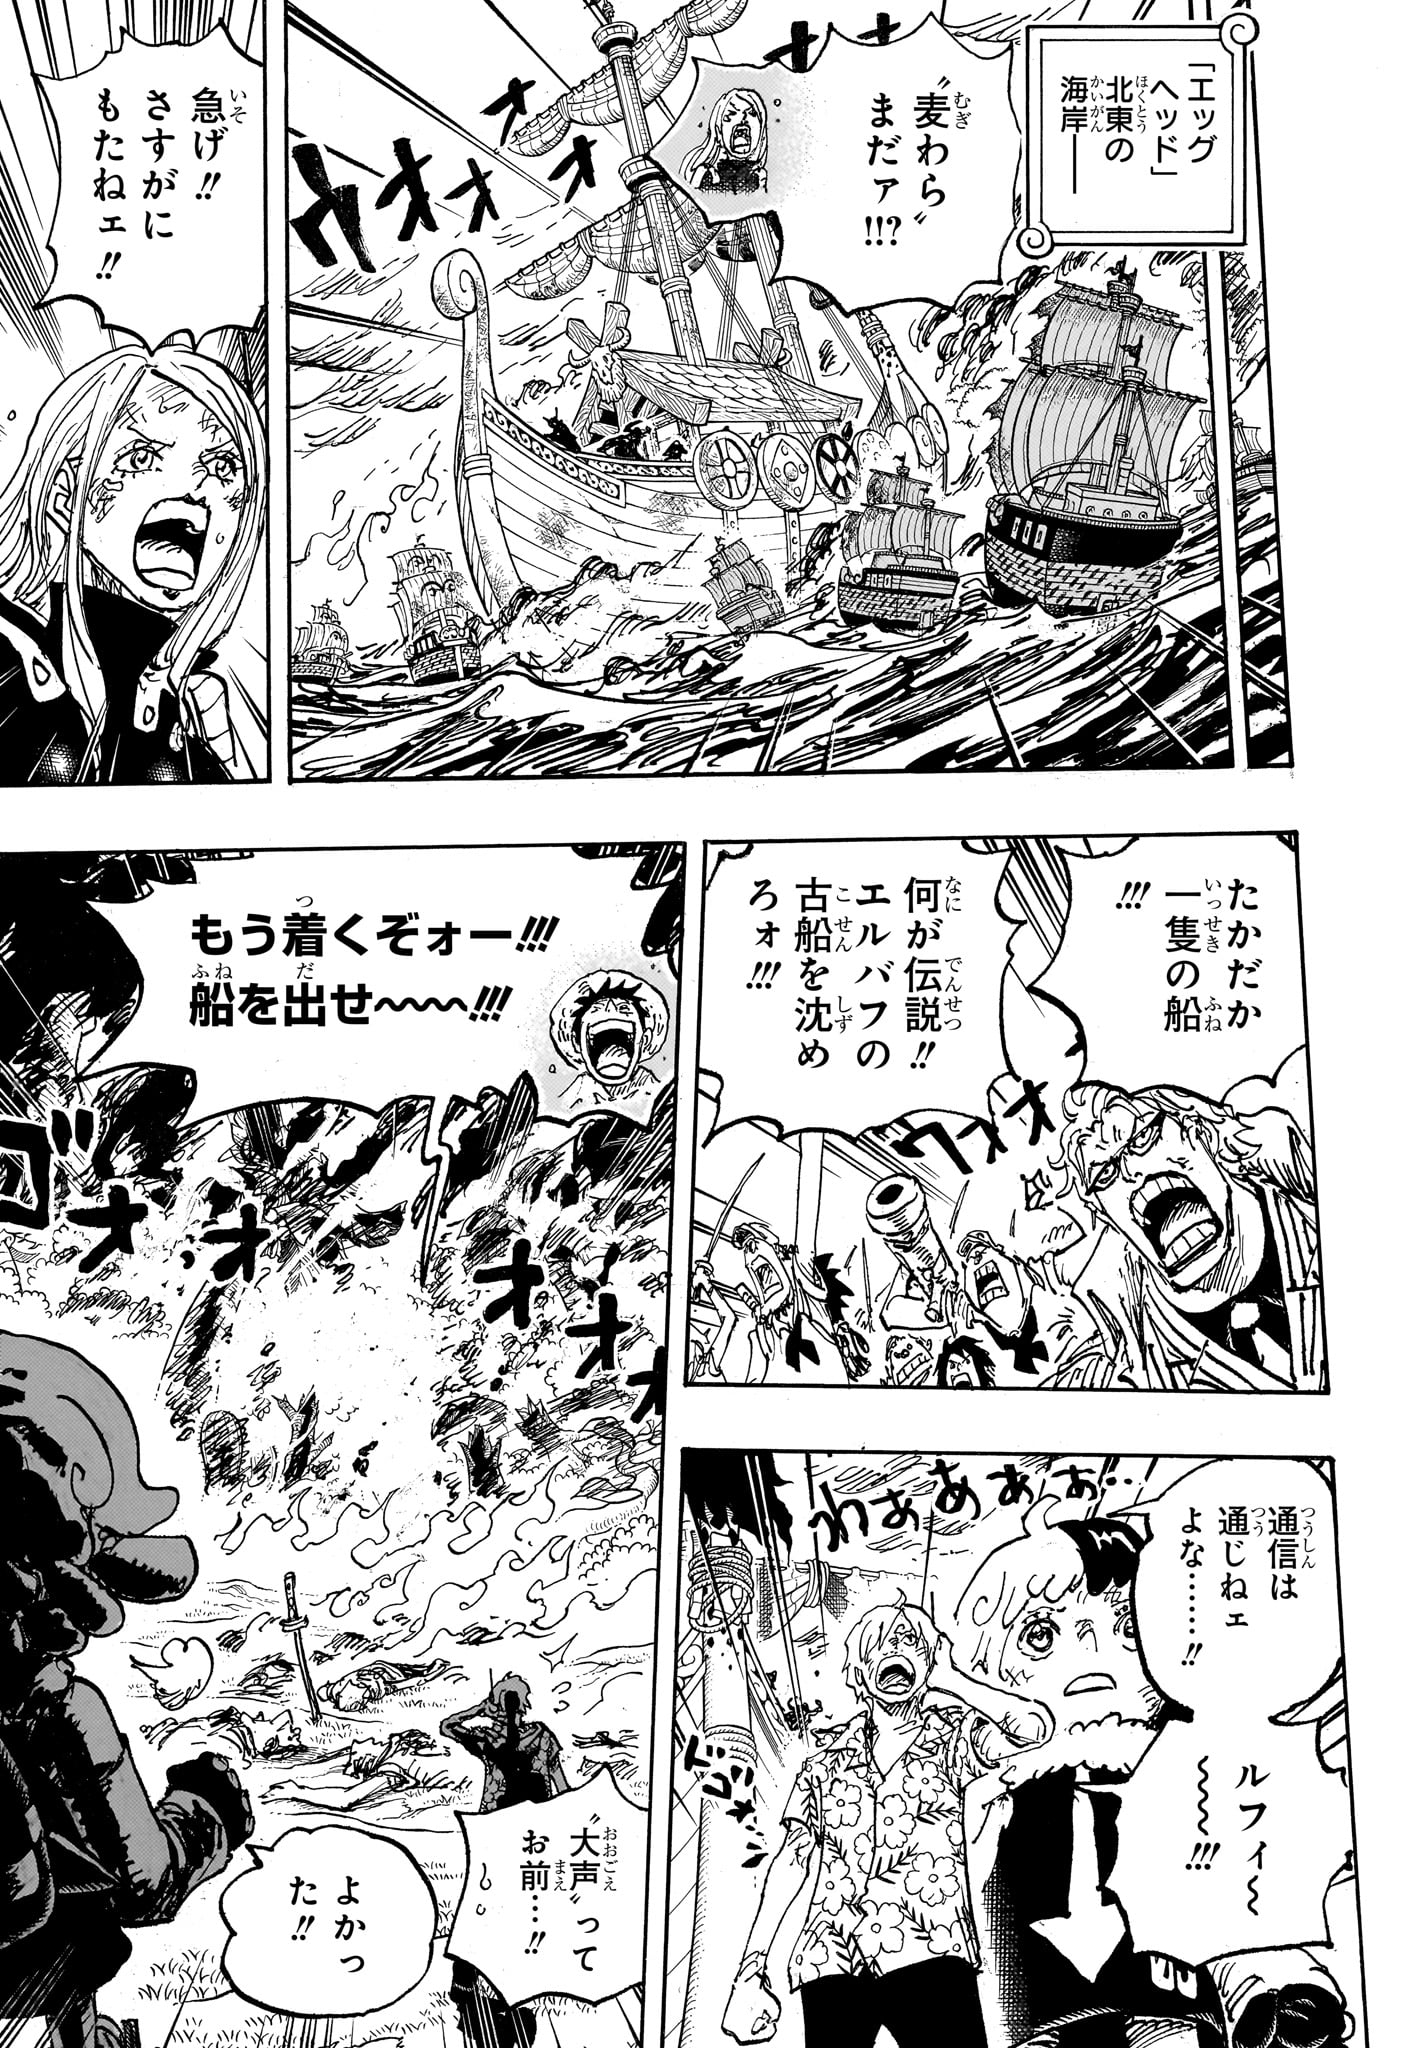 One Piece - Chapter 1117 - Page 9